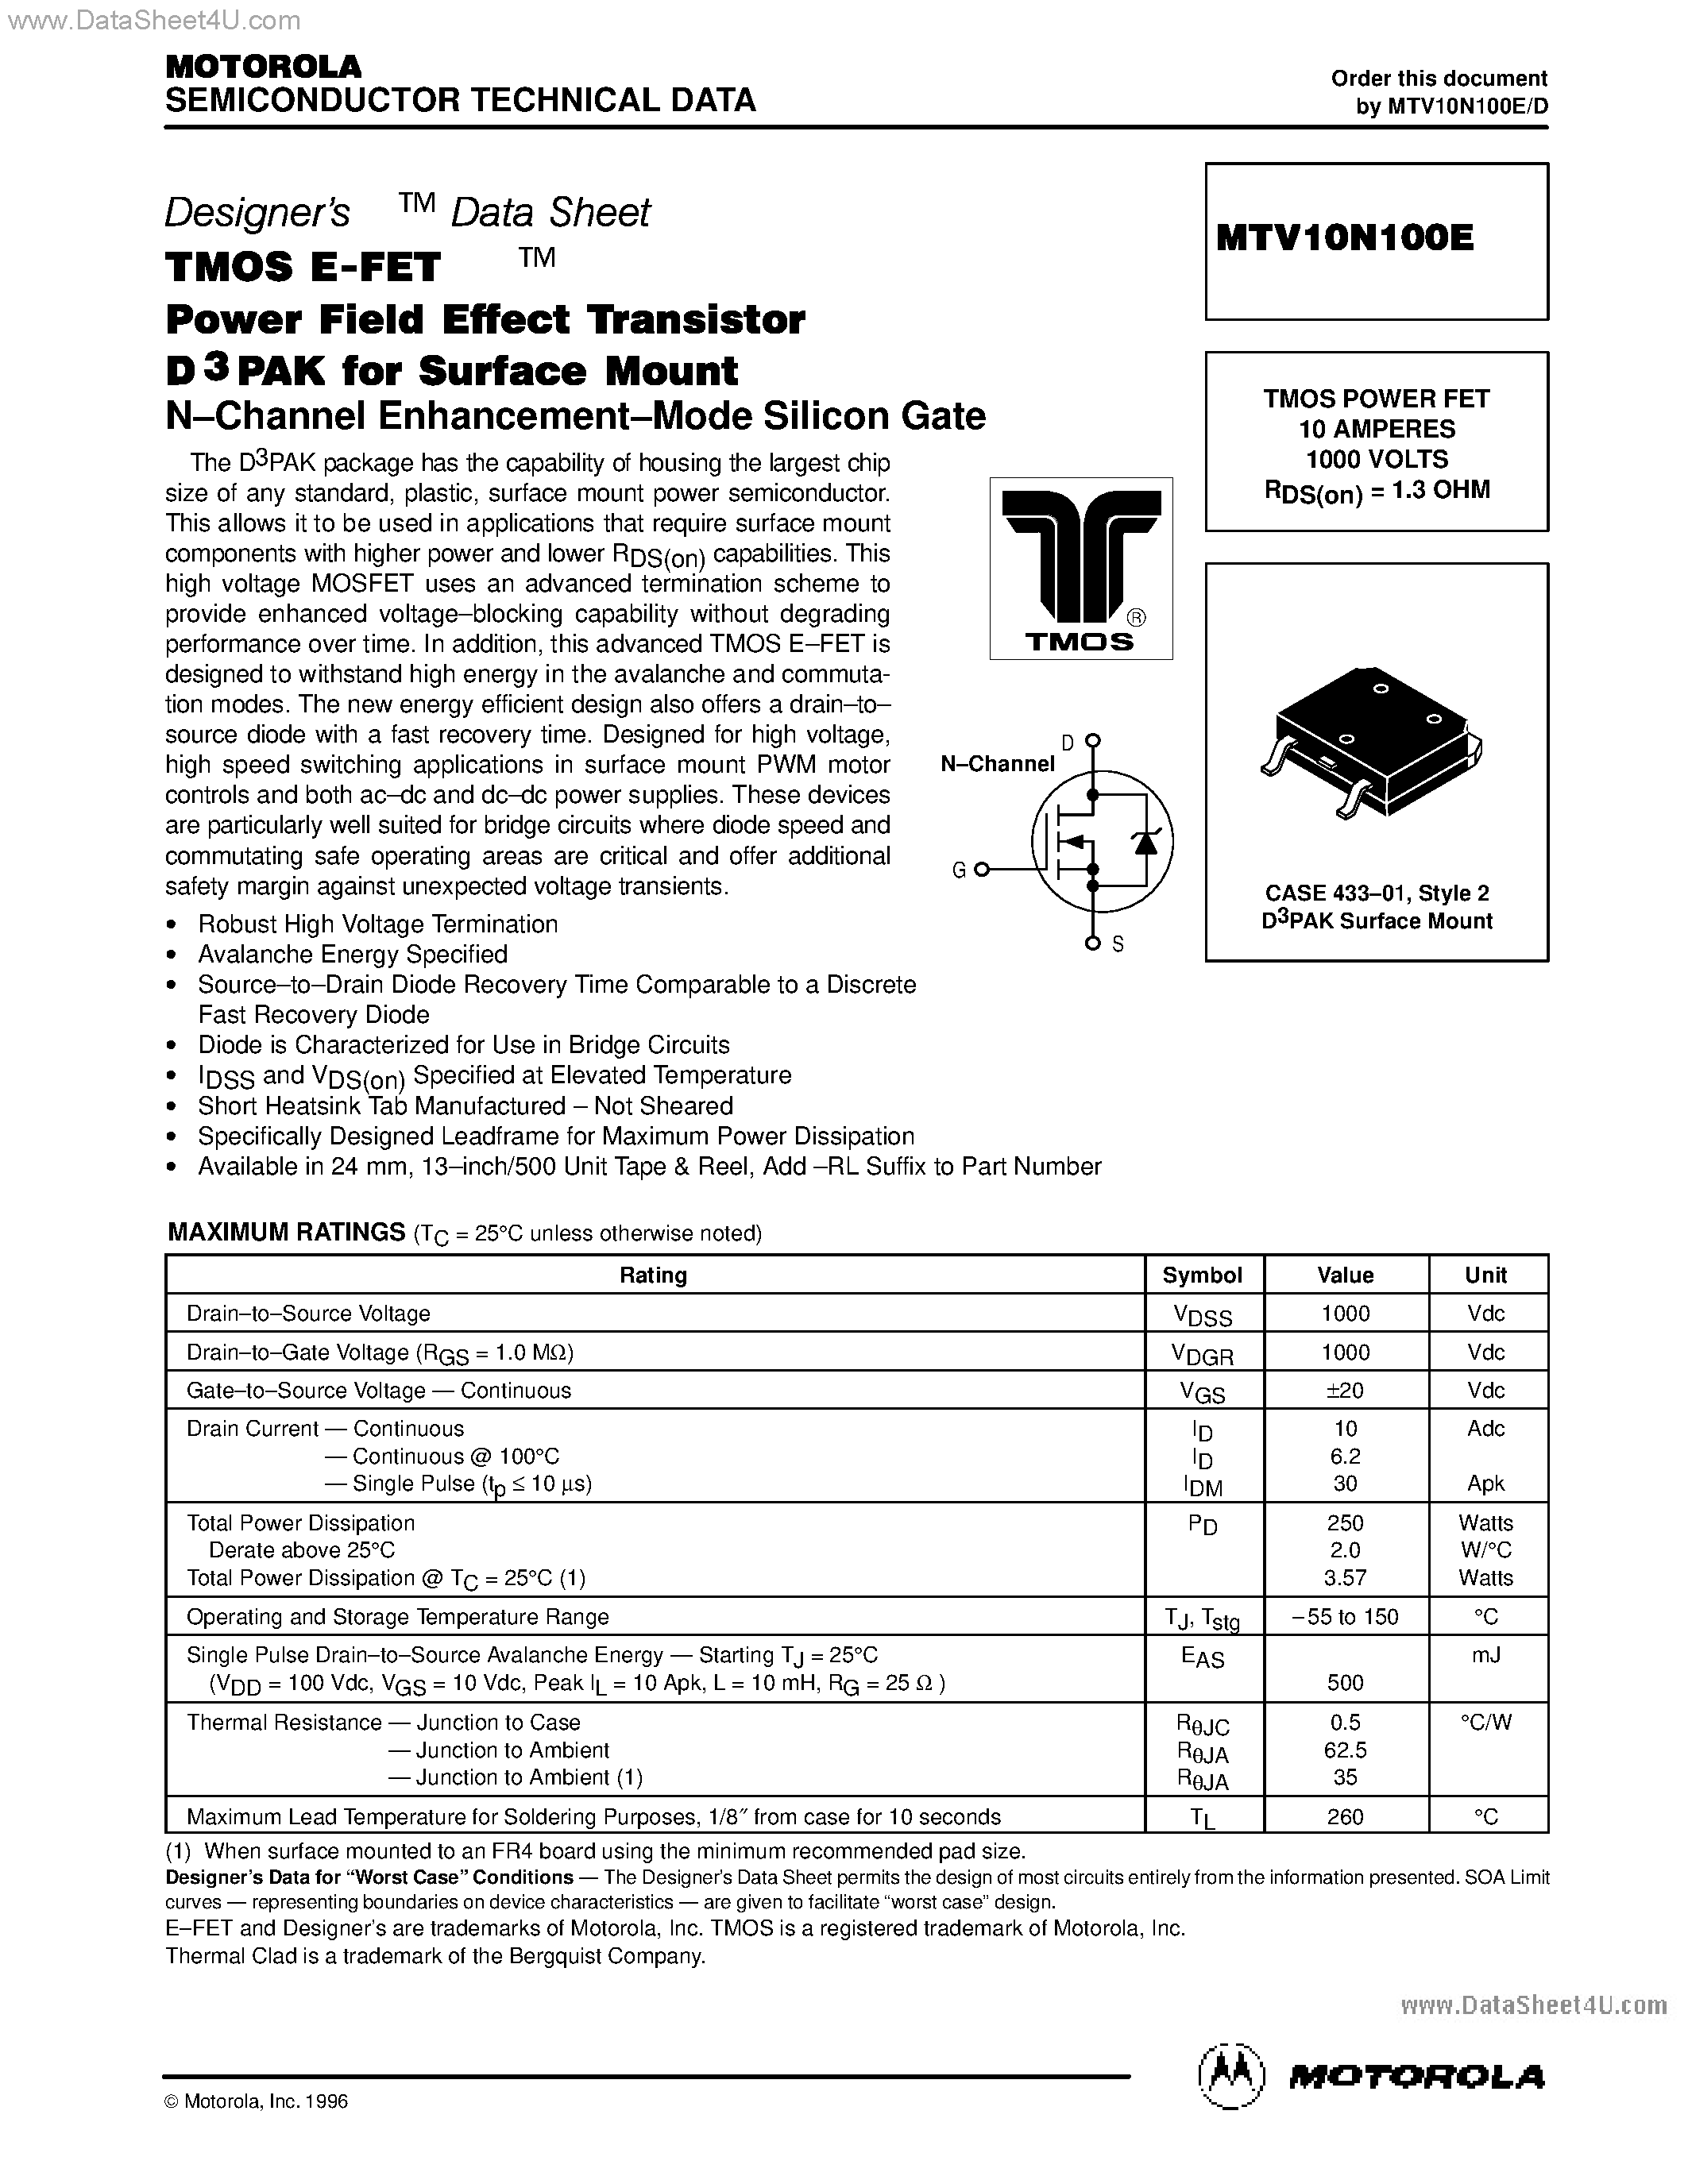 Datasheet MTV10N100E - TMOS POWER FET 10 AMPERES 1000 VOLTS page 1